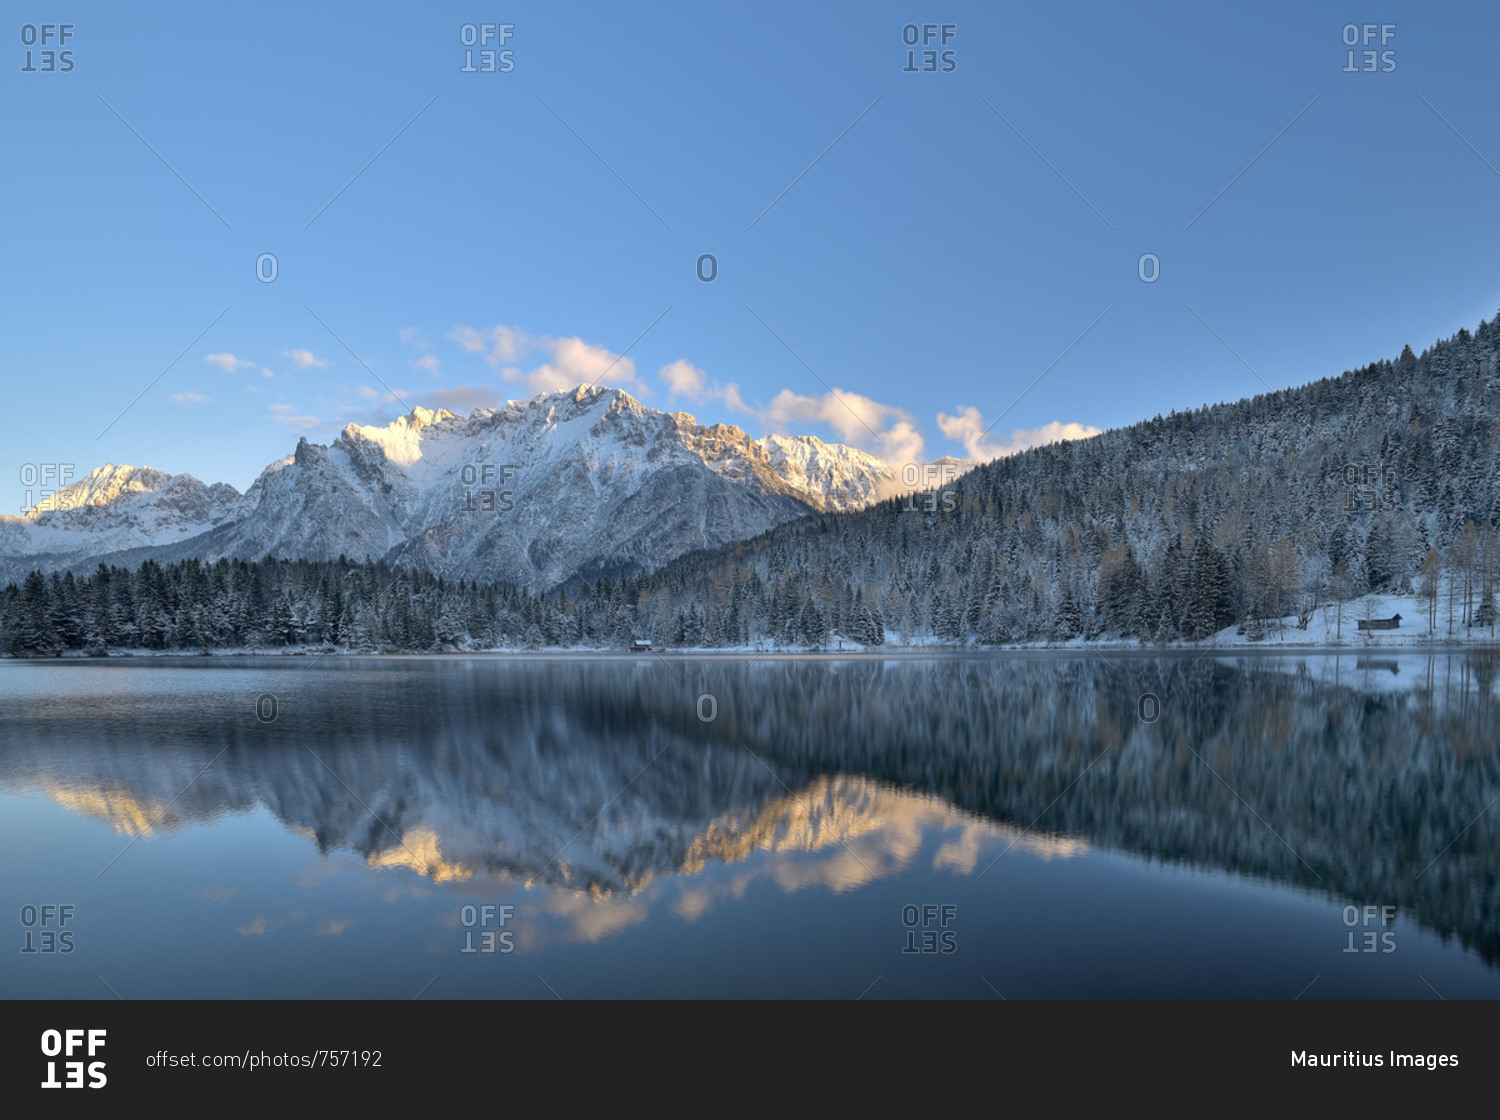 Mirroring of the Karwendelgebirge (mountains)s in the wintry Lautersee (lake)